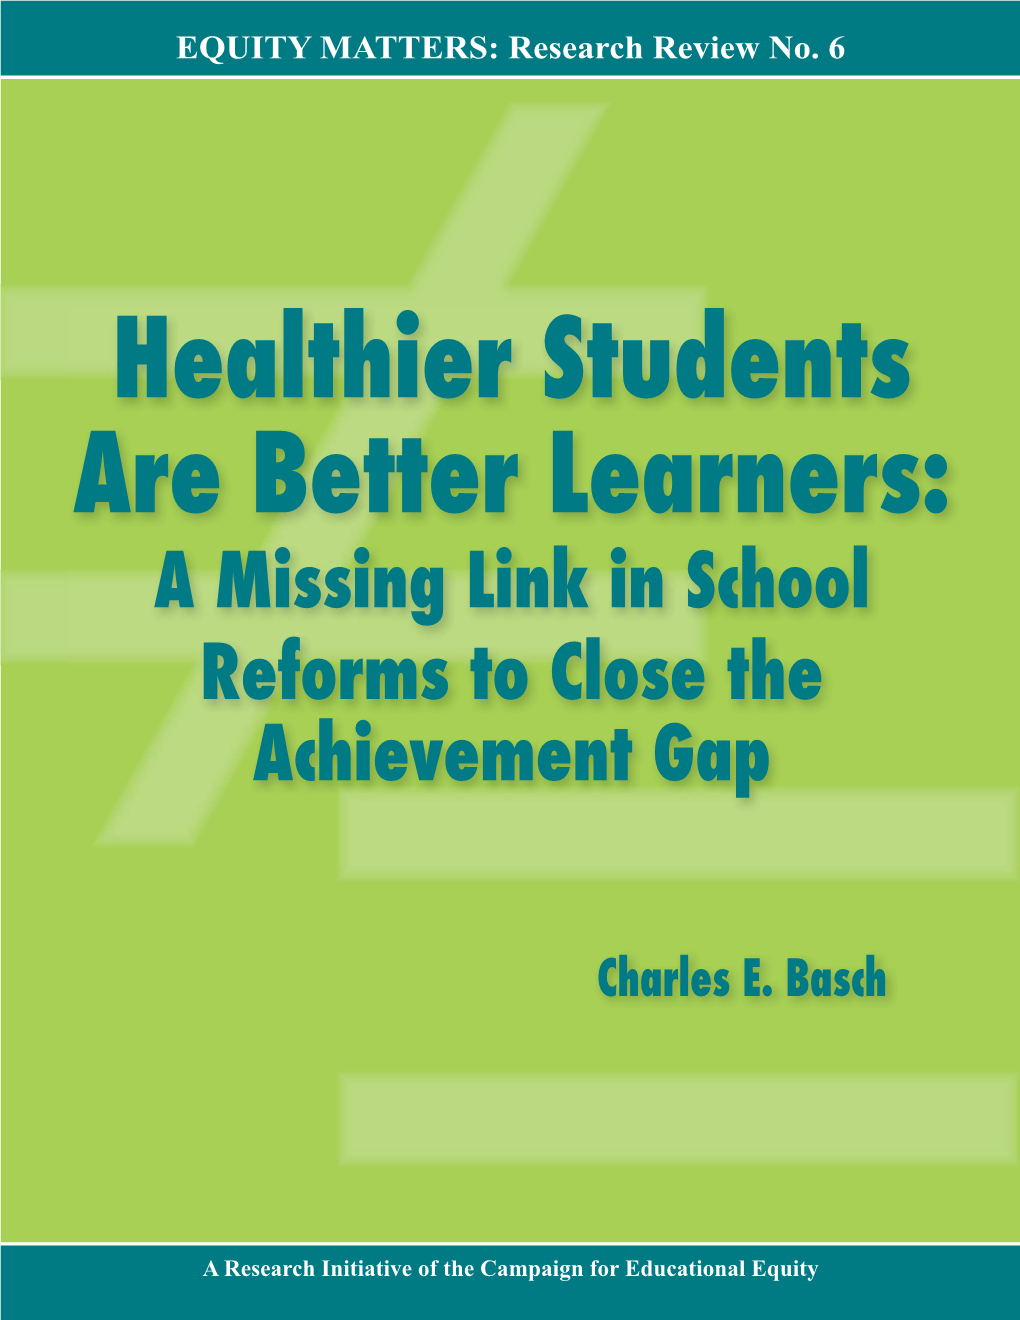 Healthier Students Are Better Learners: a Missing Link in School Reforms to Close the Achievement Gap